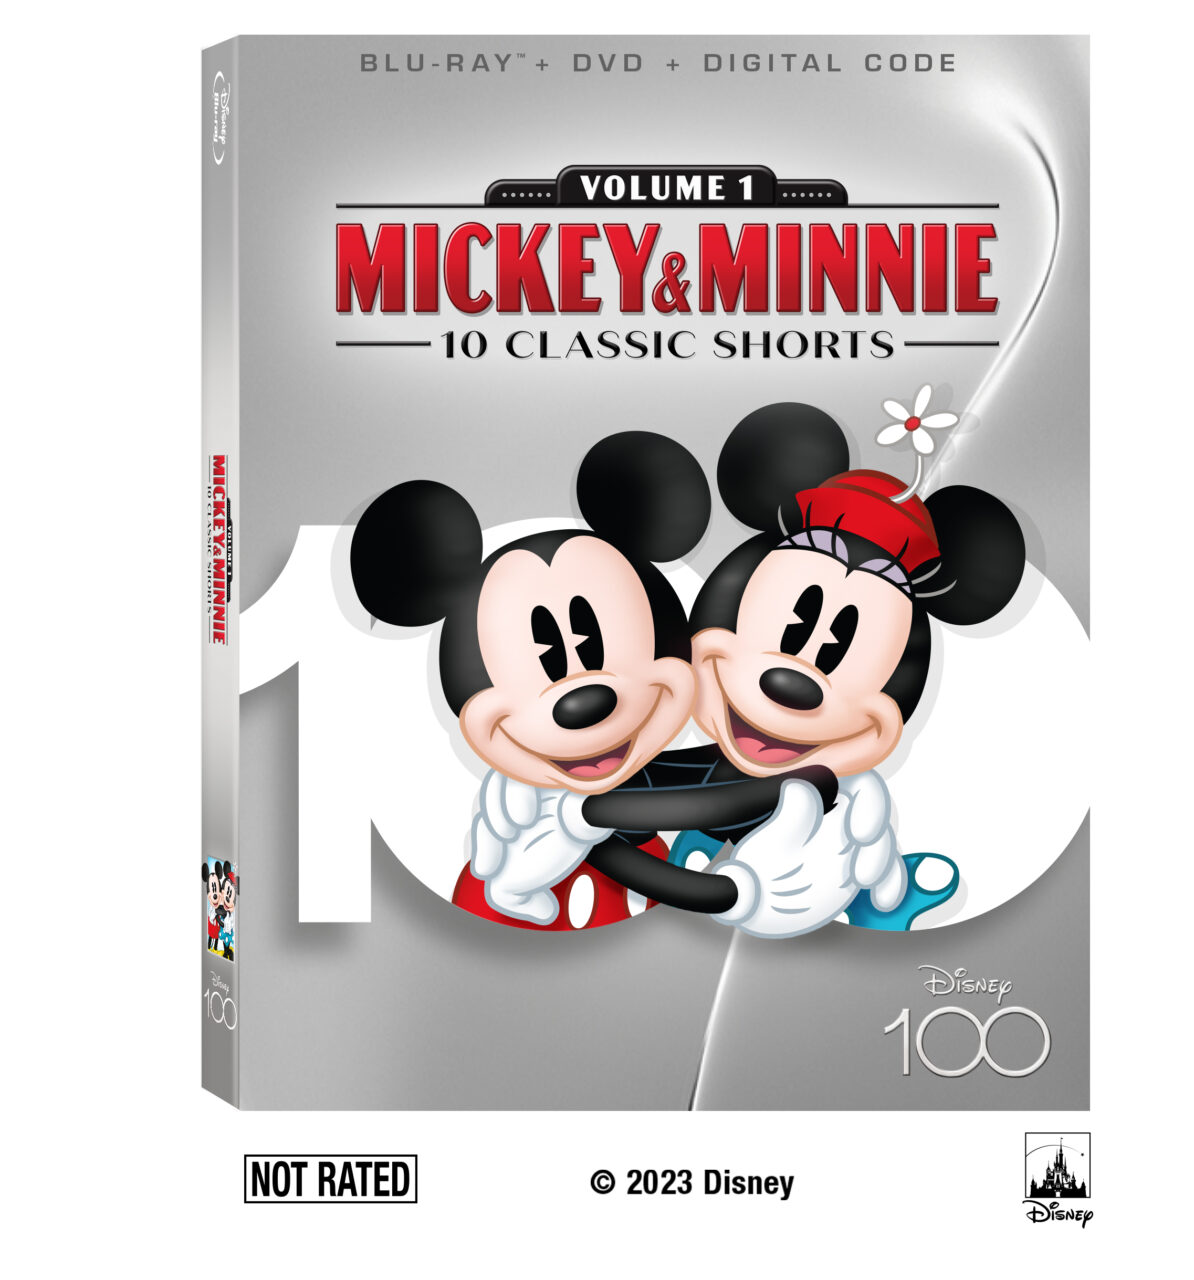 Mickey & Minnie 10 Classic Shorts - Volume 1 Blu-Ray Combo Pack cover (Disney)